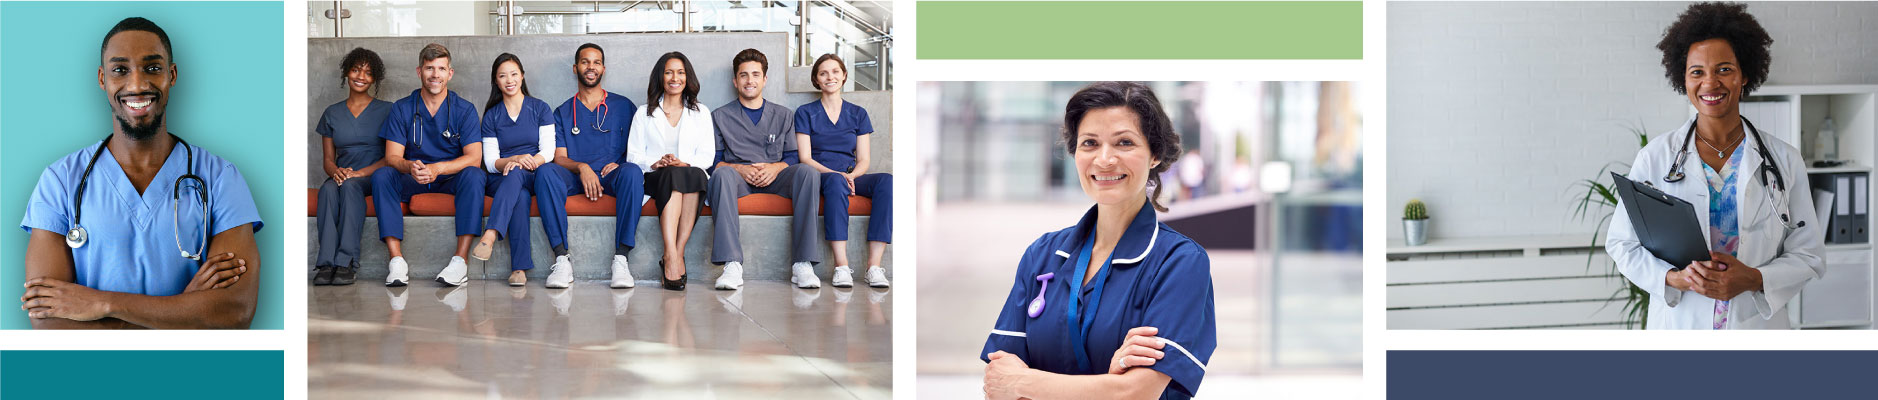 photo collage of doctors and nurses